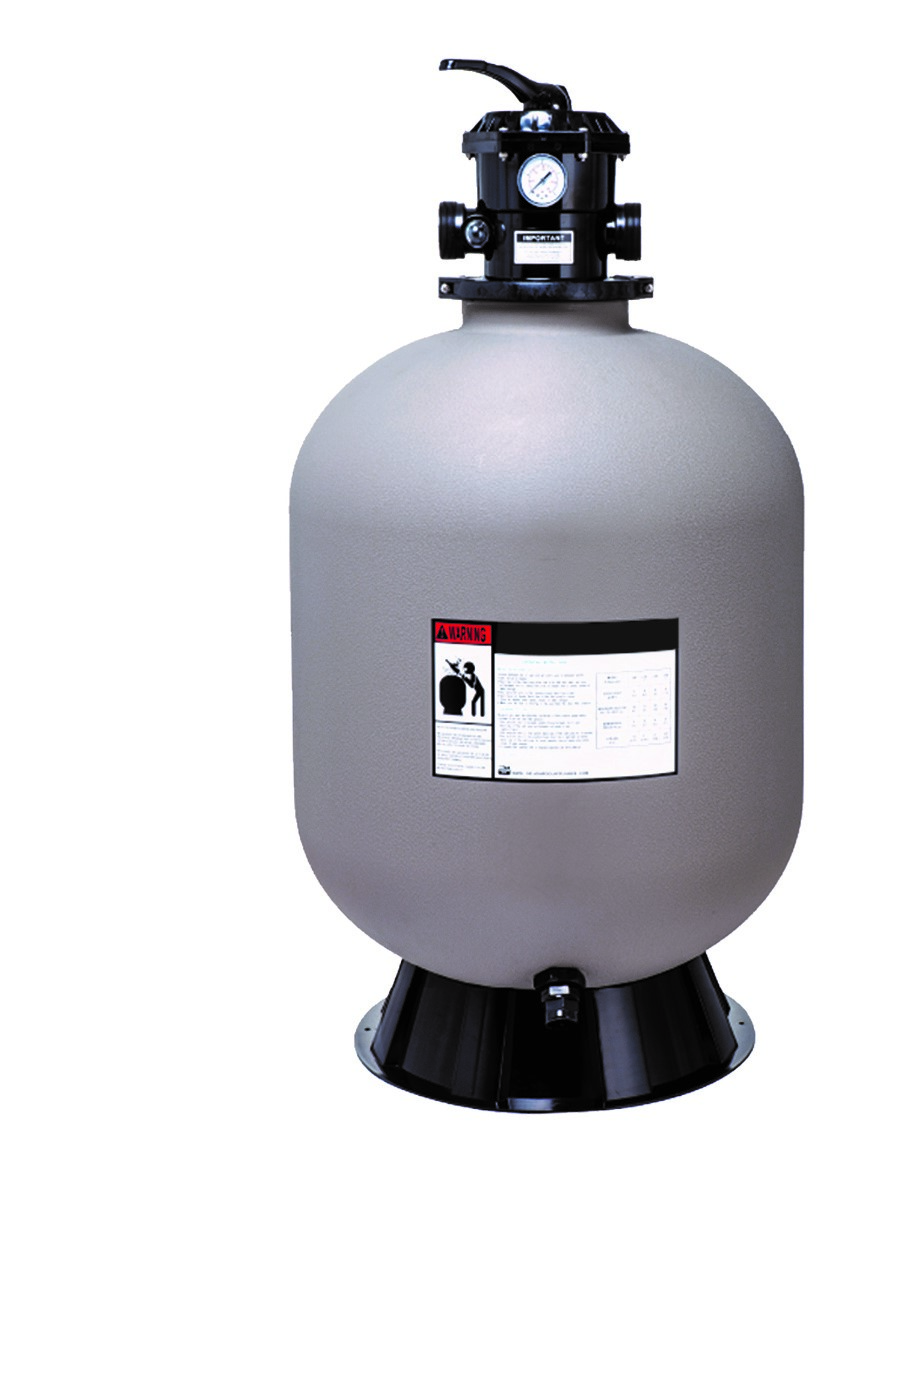 CIPU - Top mount Sand Filters - 24 inch